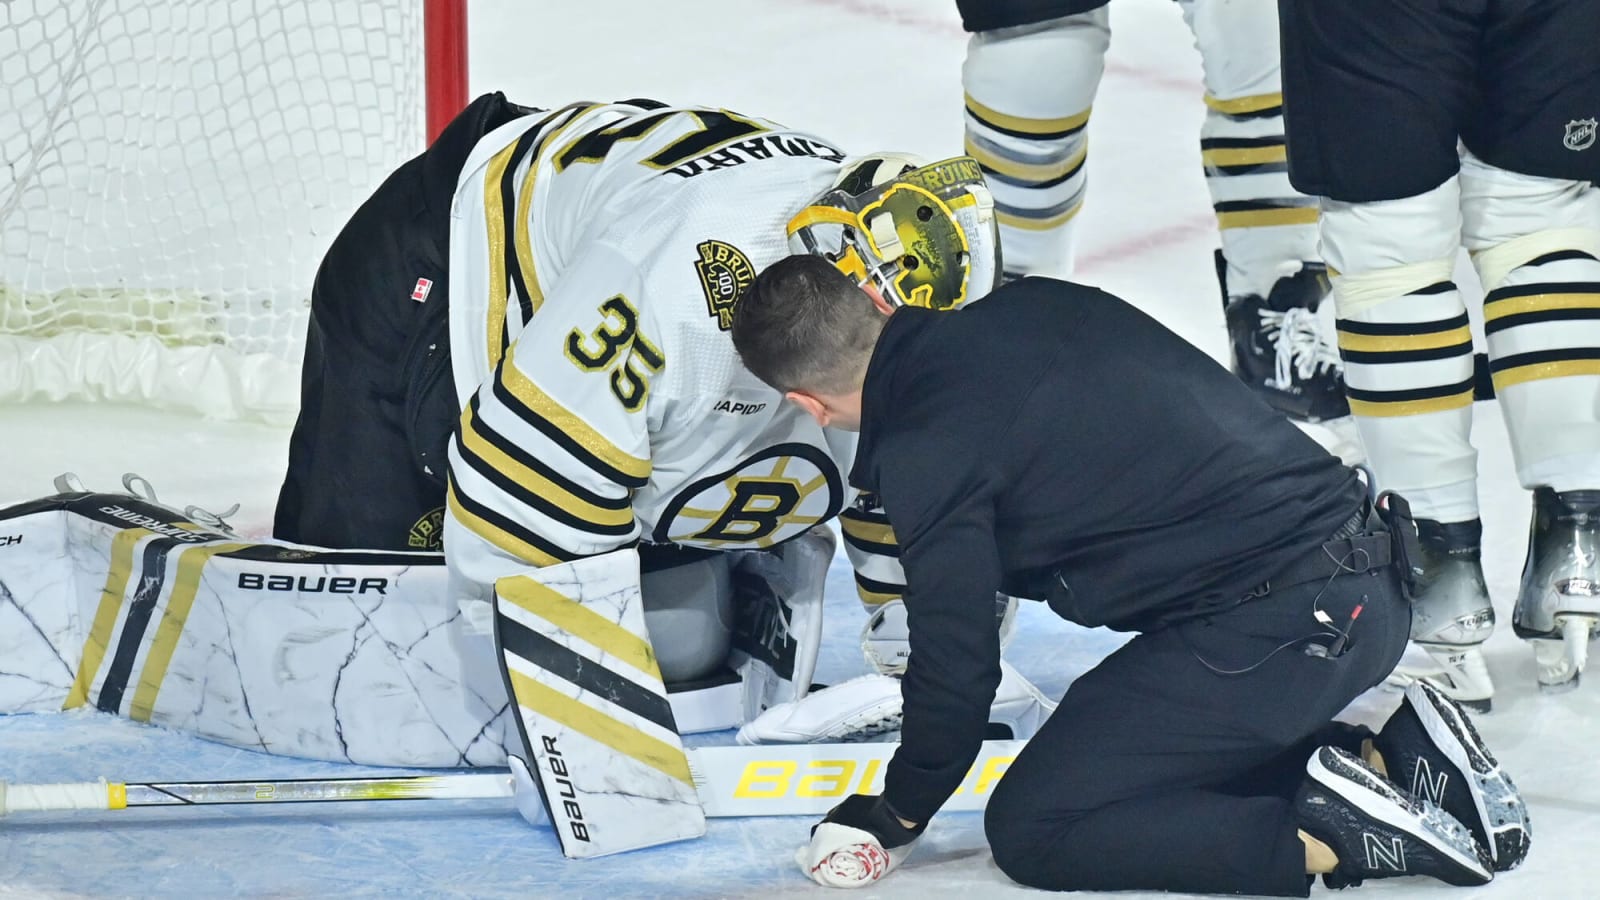 Watch: Bruins goaltender Linus Ullmark suffers CRITICAL lower-body injury in OT during clash against Coyotes